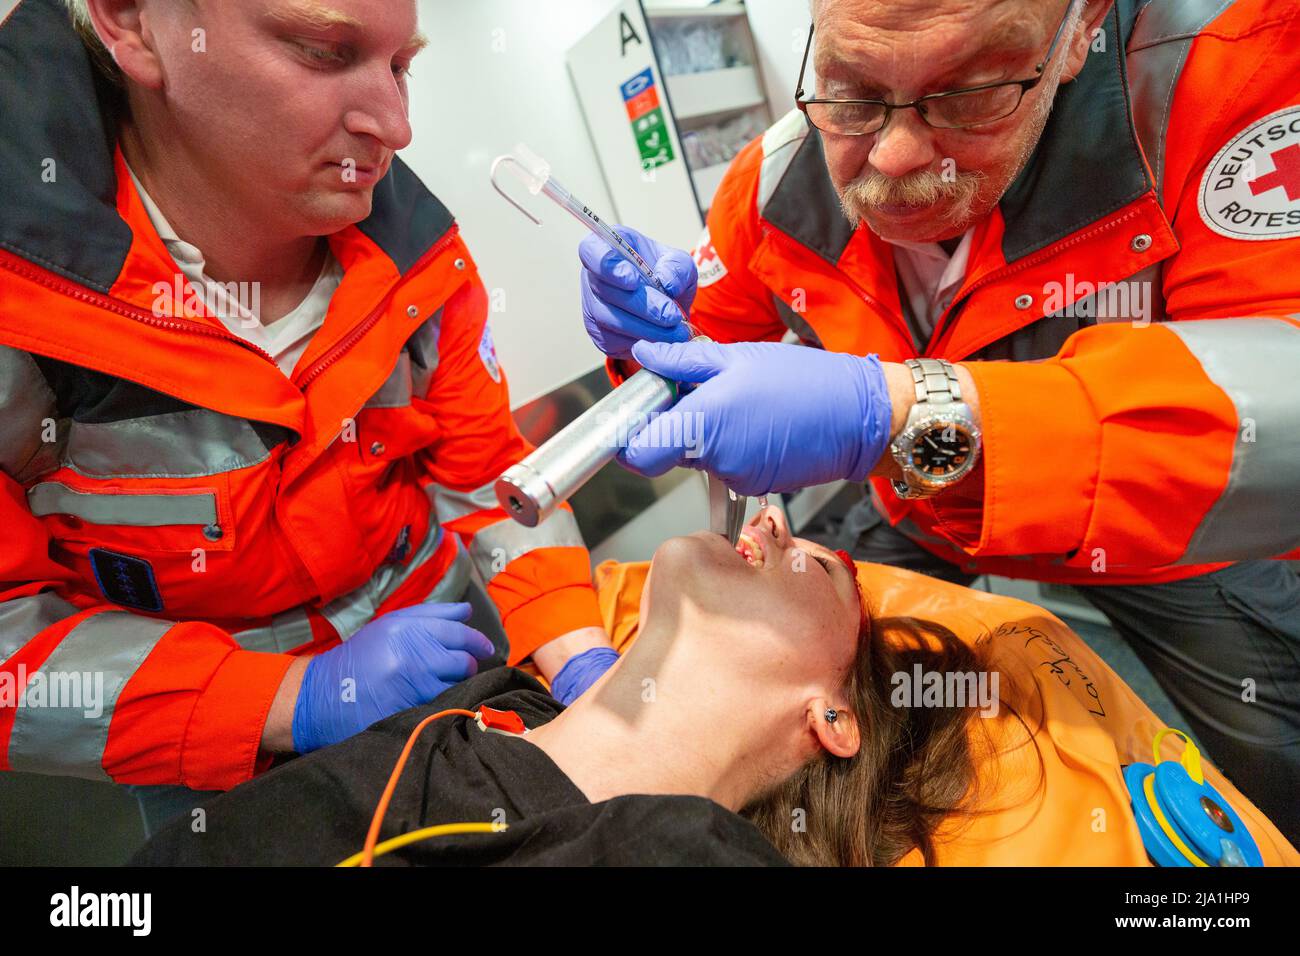 Landesbergen, Germany. May 11, 2022: German Paramedics from Deutsches Rotes Kreuz, works at an emergency site. Deutsches Rotes Kreuz is the national R Stock Photo